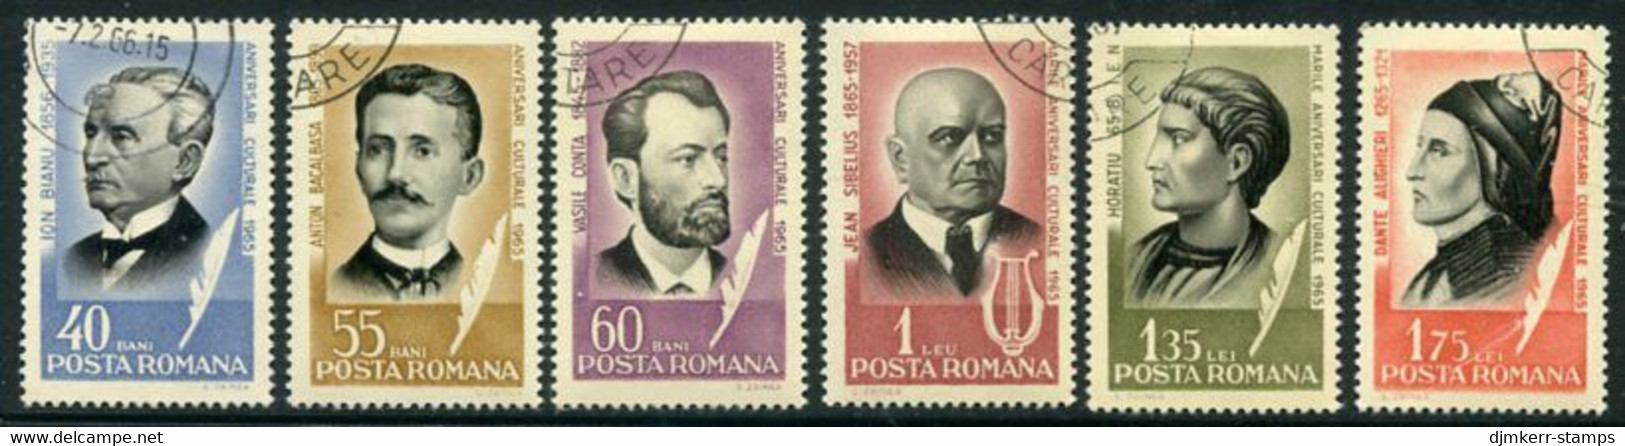 ROMANIA 1965 Personalities Used.  Michel 2396-401 - Used Stamps